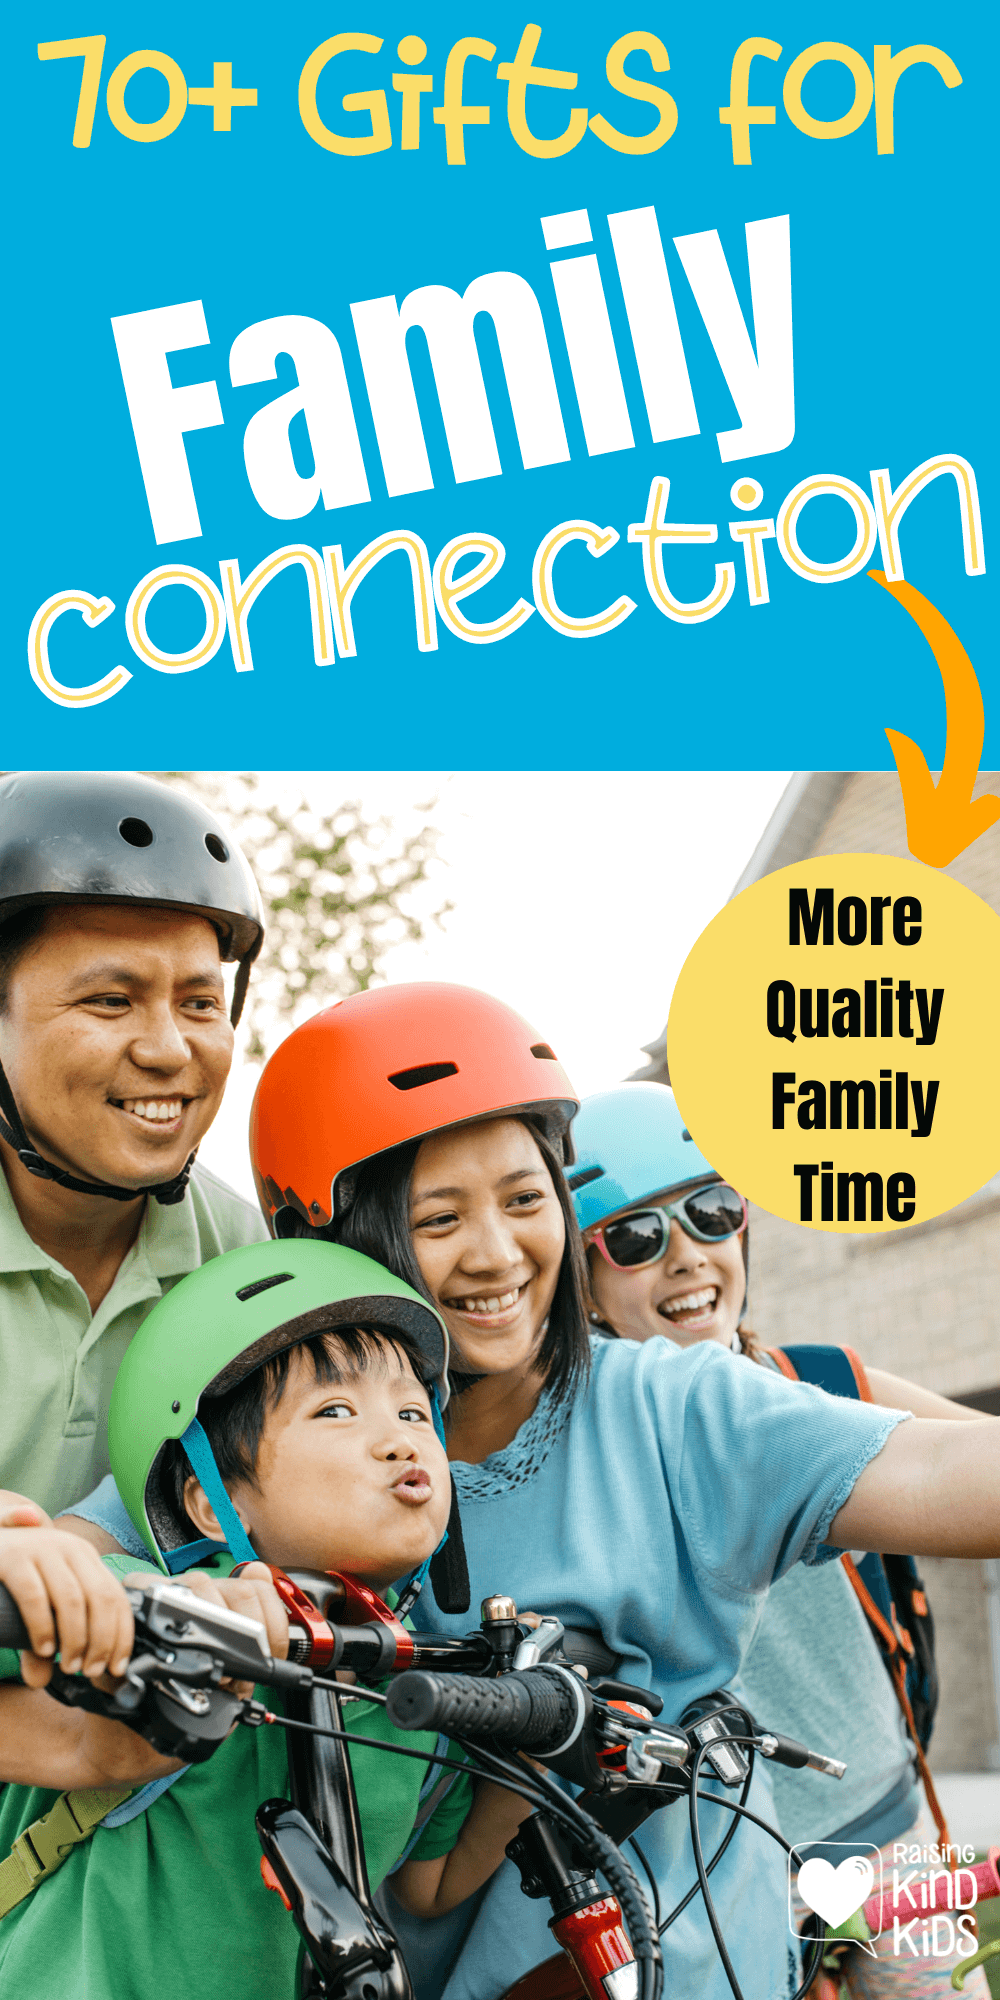 Create more quality family time with these family time ideas at home and gifts to build a strong family identity. #familytime #qualityfamilytime #familyidentity